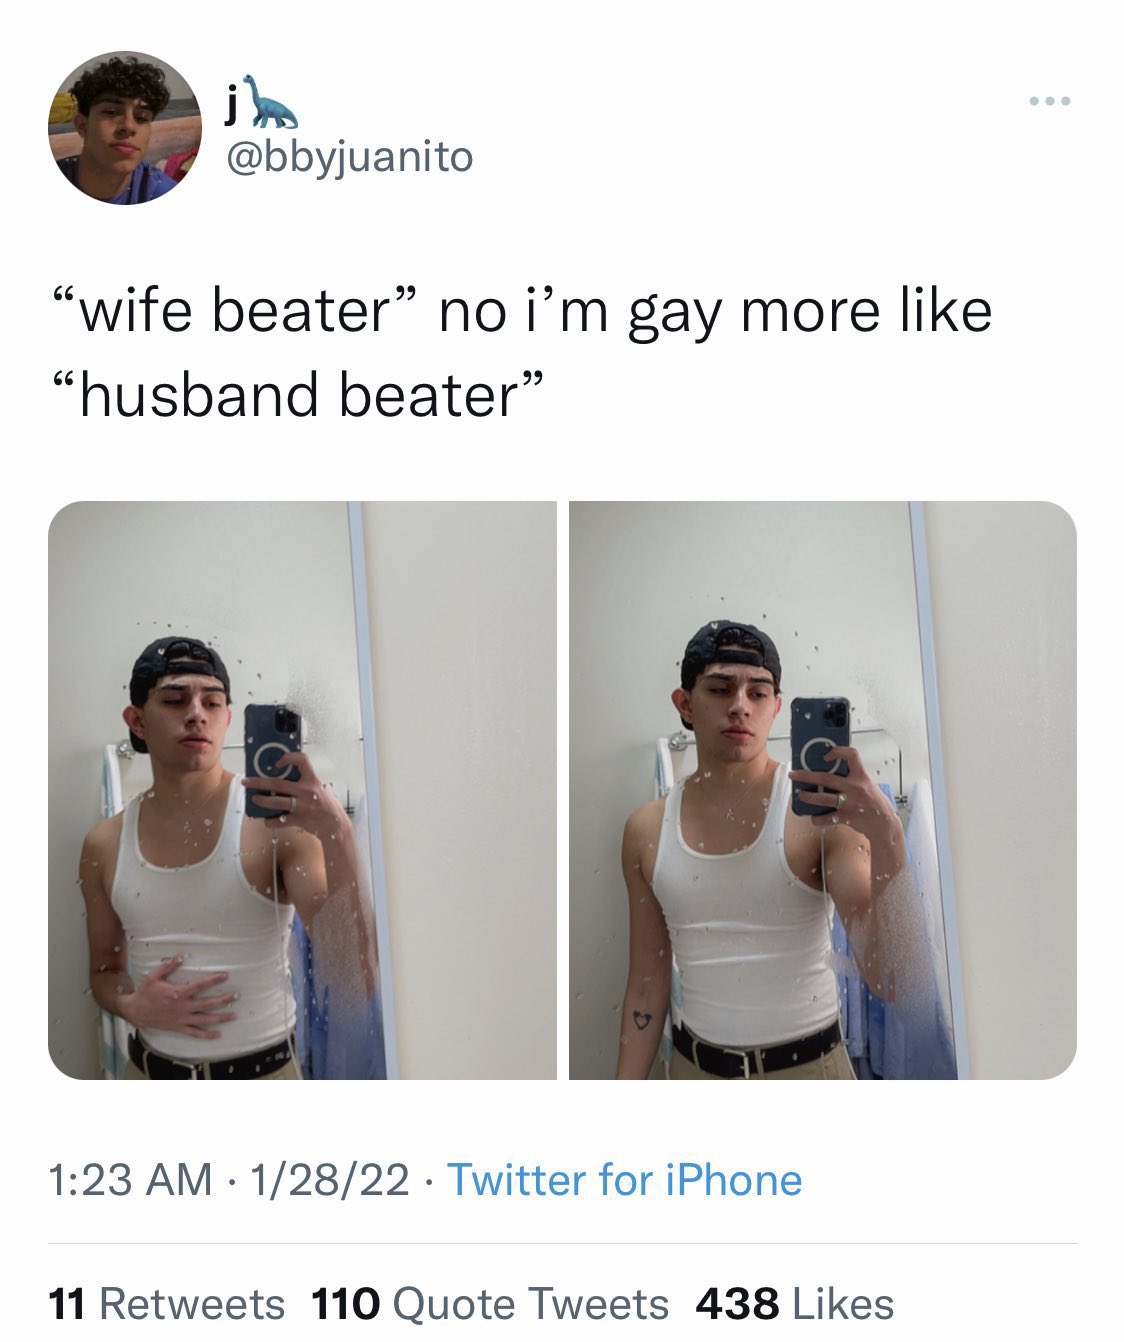 Unhinged Tweets - shoulder - in "wife beater" no i'm gay more "husband beater" 12822 Twitter for iPhone 11 110 Quote Tweets 438